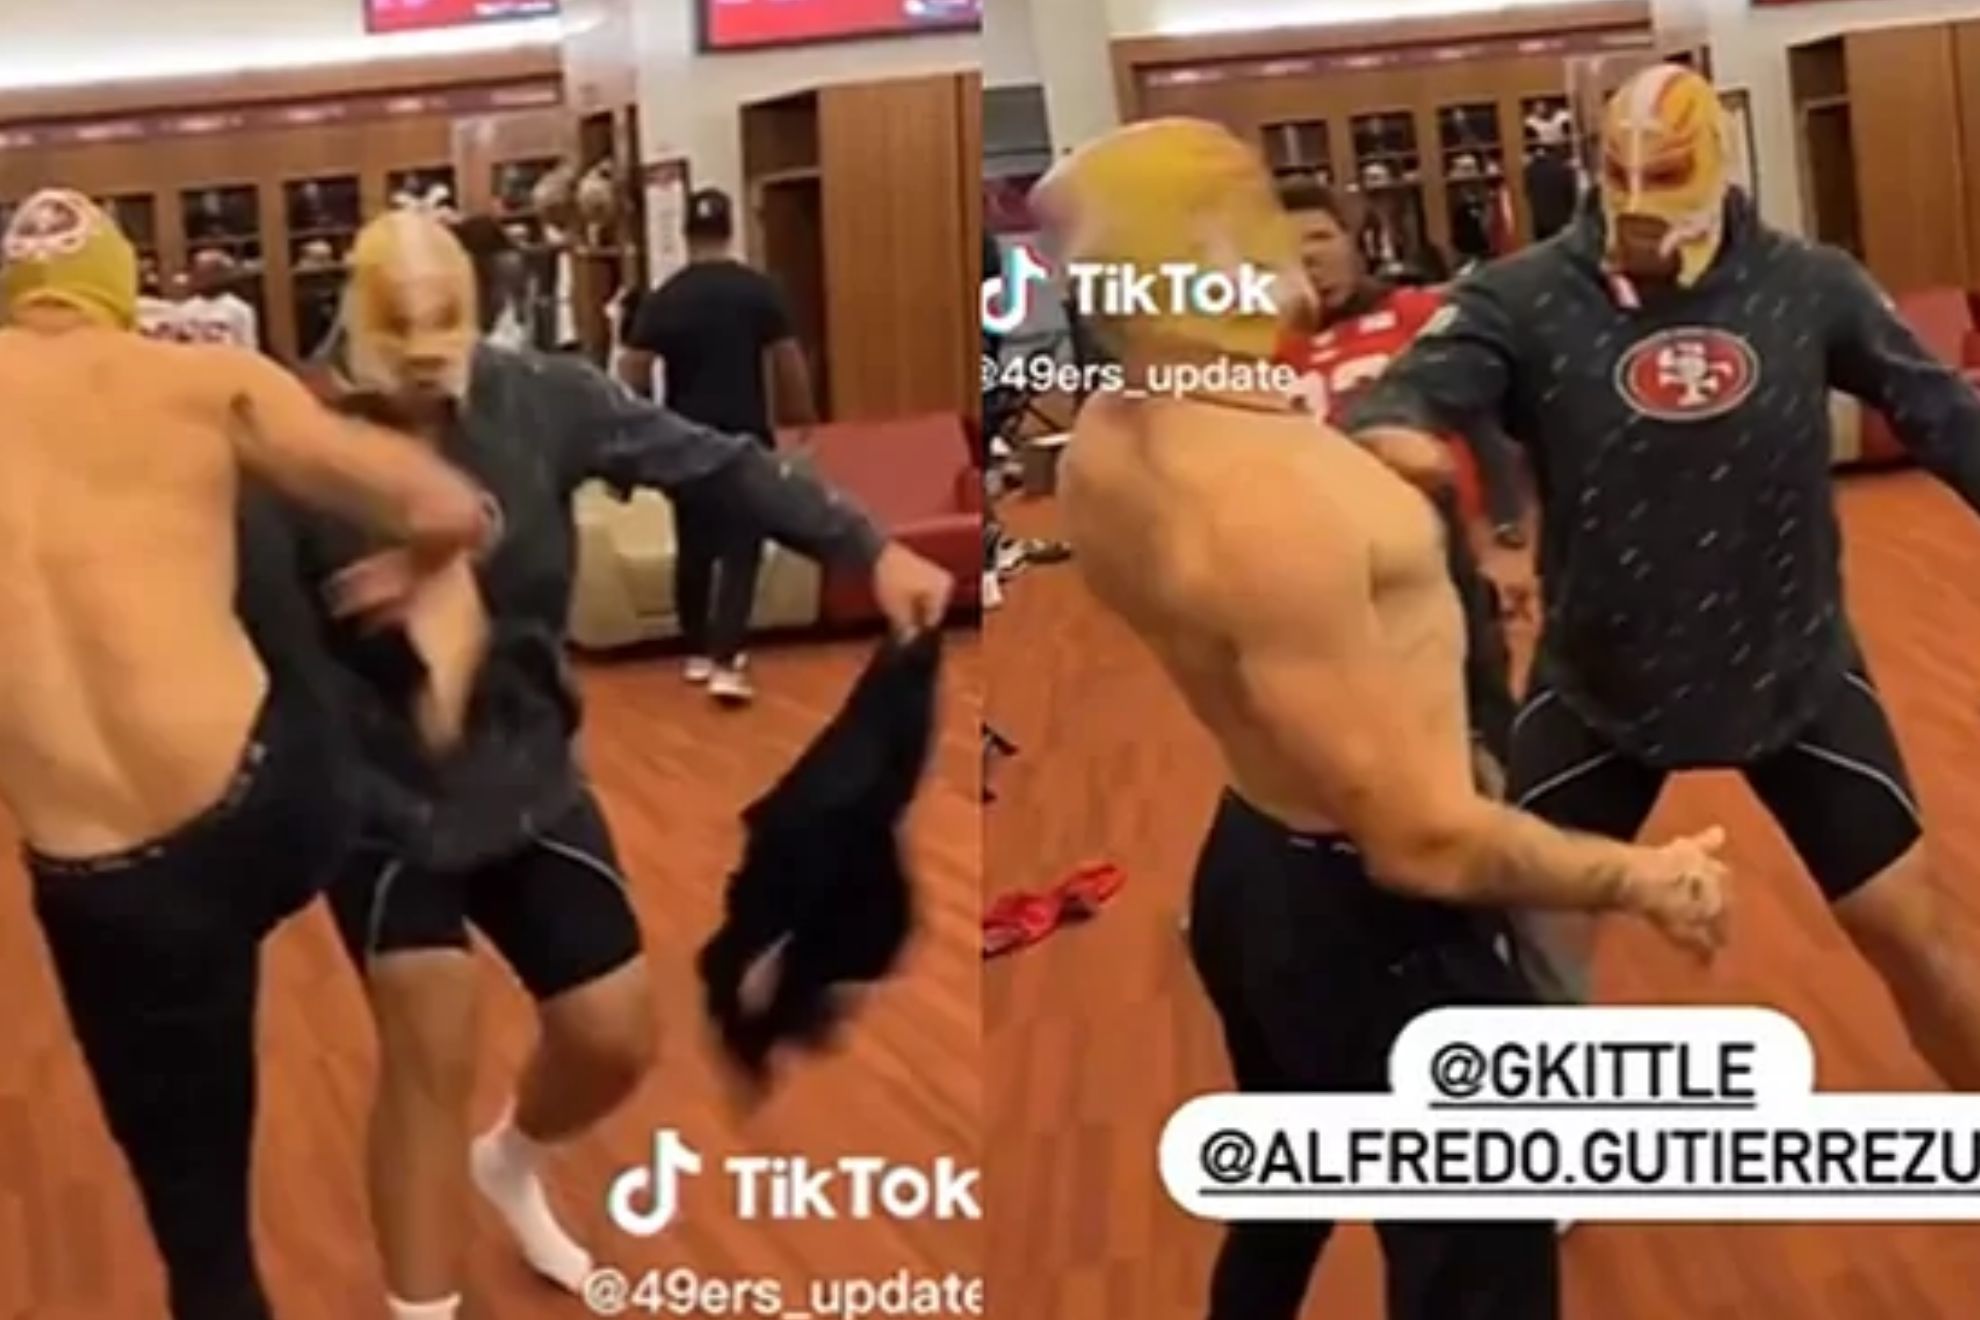 George Kittle, San Francisco 49ers tight end shows off his wrestling moves